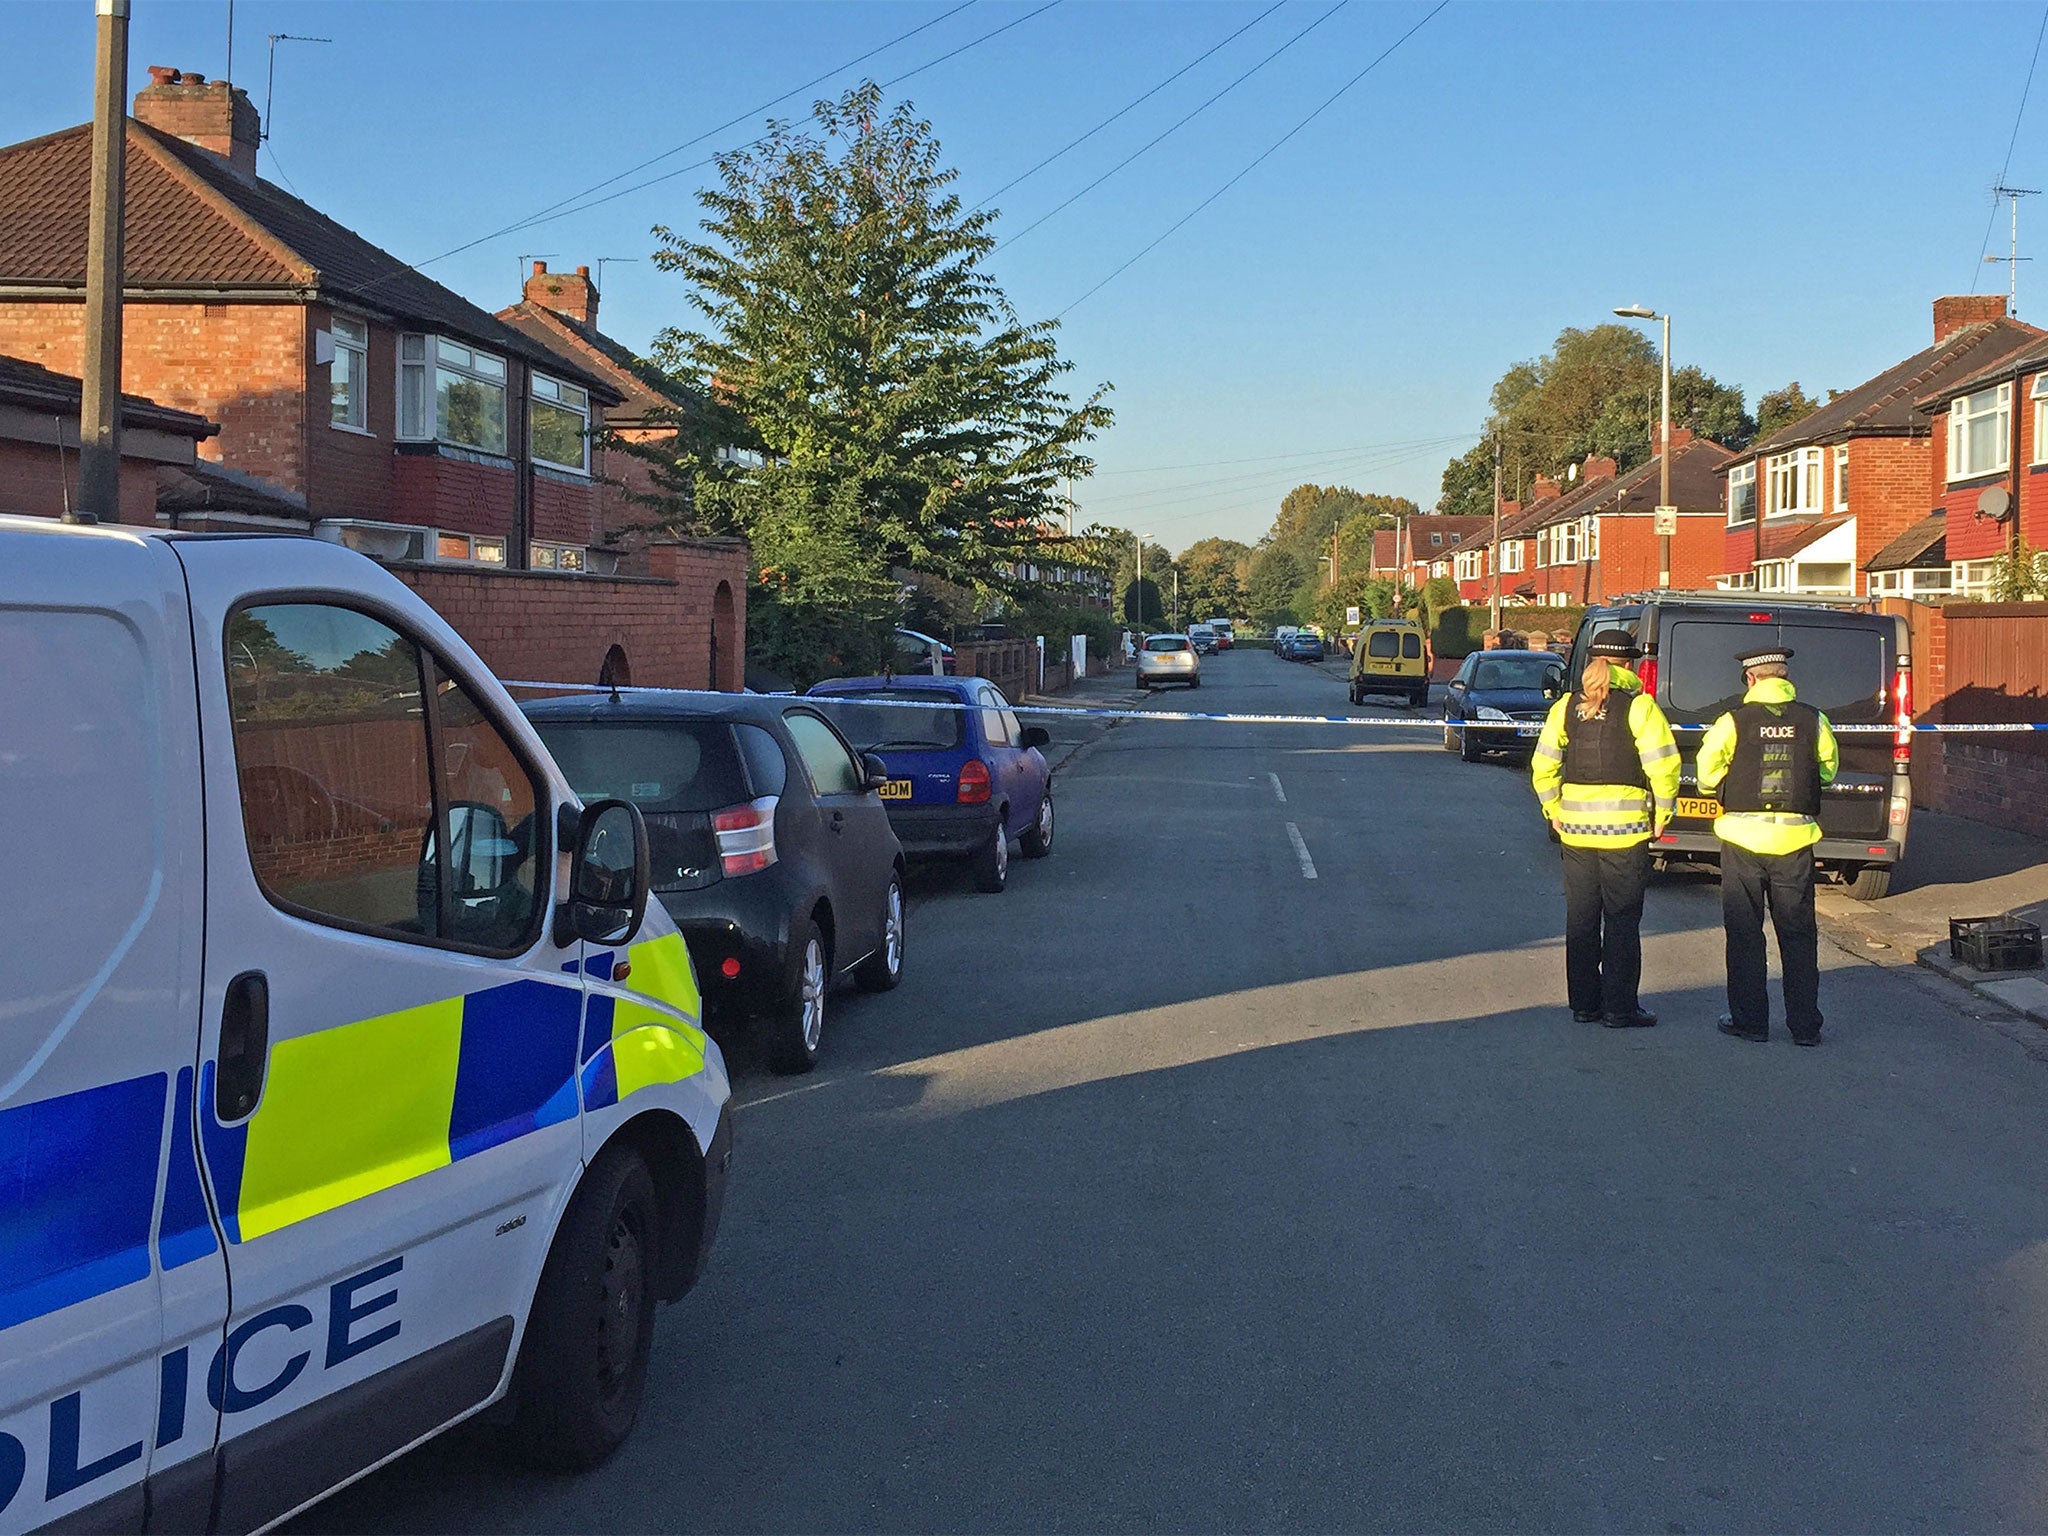 The pair suffered leg wounds and were taken to hospital after the attack in Gillingham Road, Salford